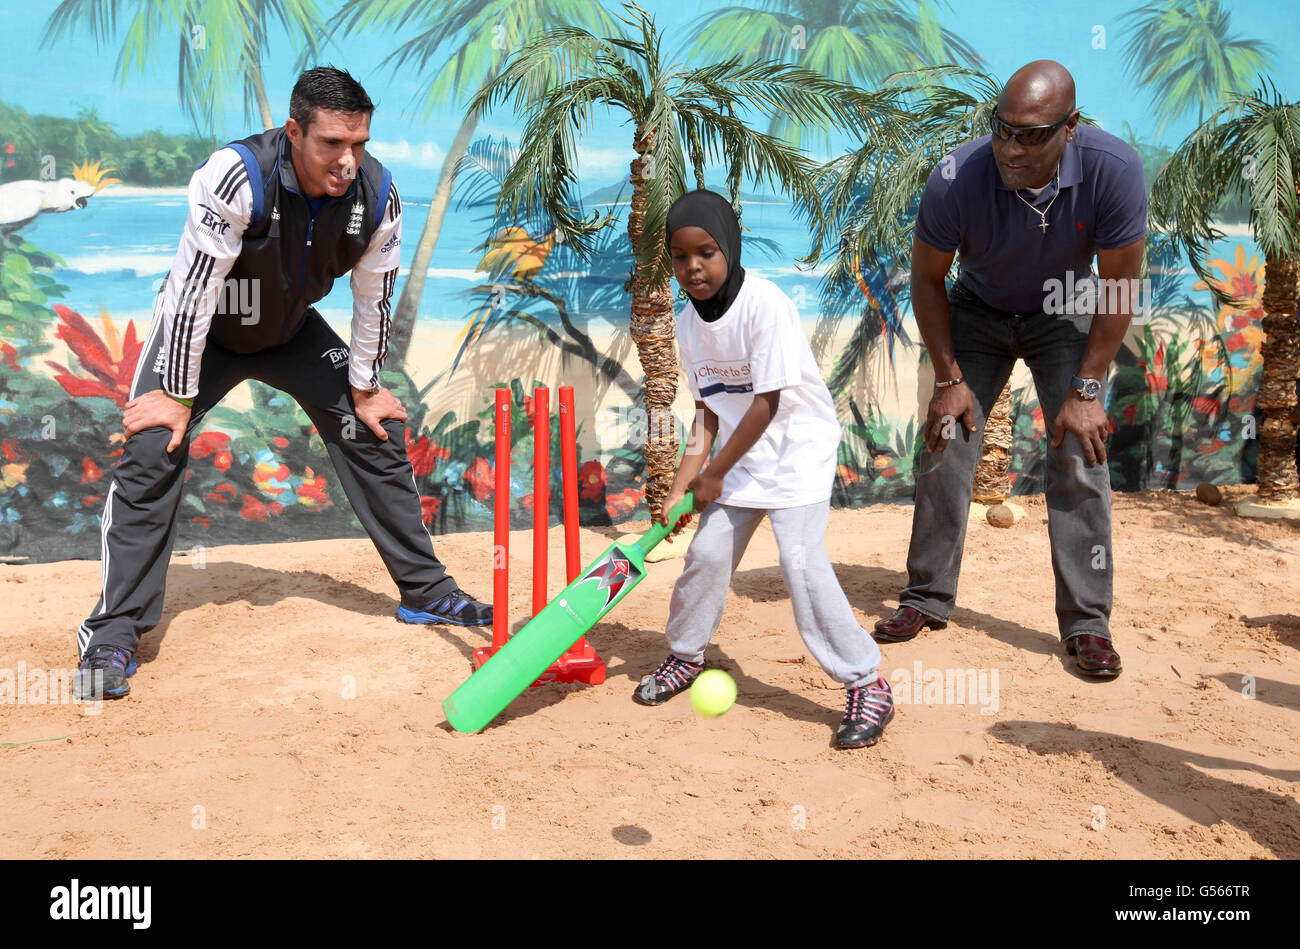 Sadiya Ali from Year 2 gets a lesson from England cricketer Kevin Pietersen (left) and former West Indian cricketer, Sir Viv Richards during the celebrations for the fifth anniversary of Chance to Shine's Brit Insurance National Cricket Day, with a Caribbean cricket theme, at Johanna Primary School in London. Stock Photo